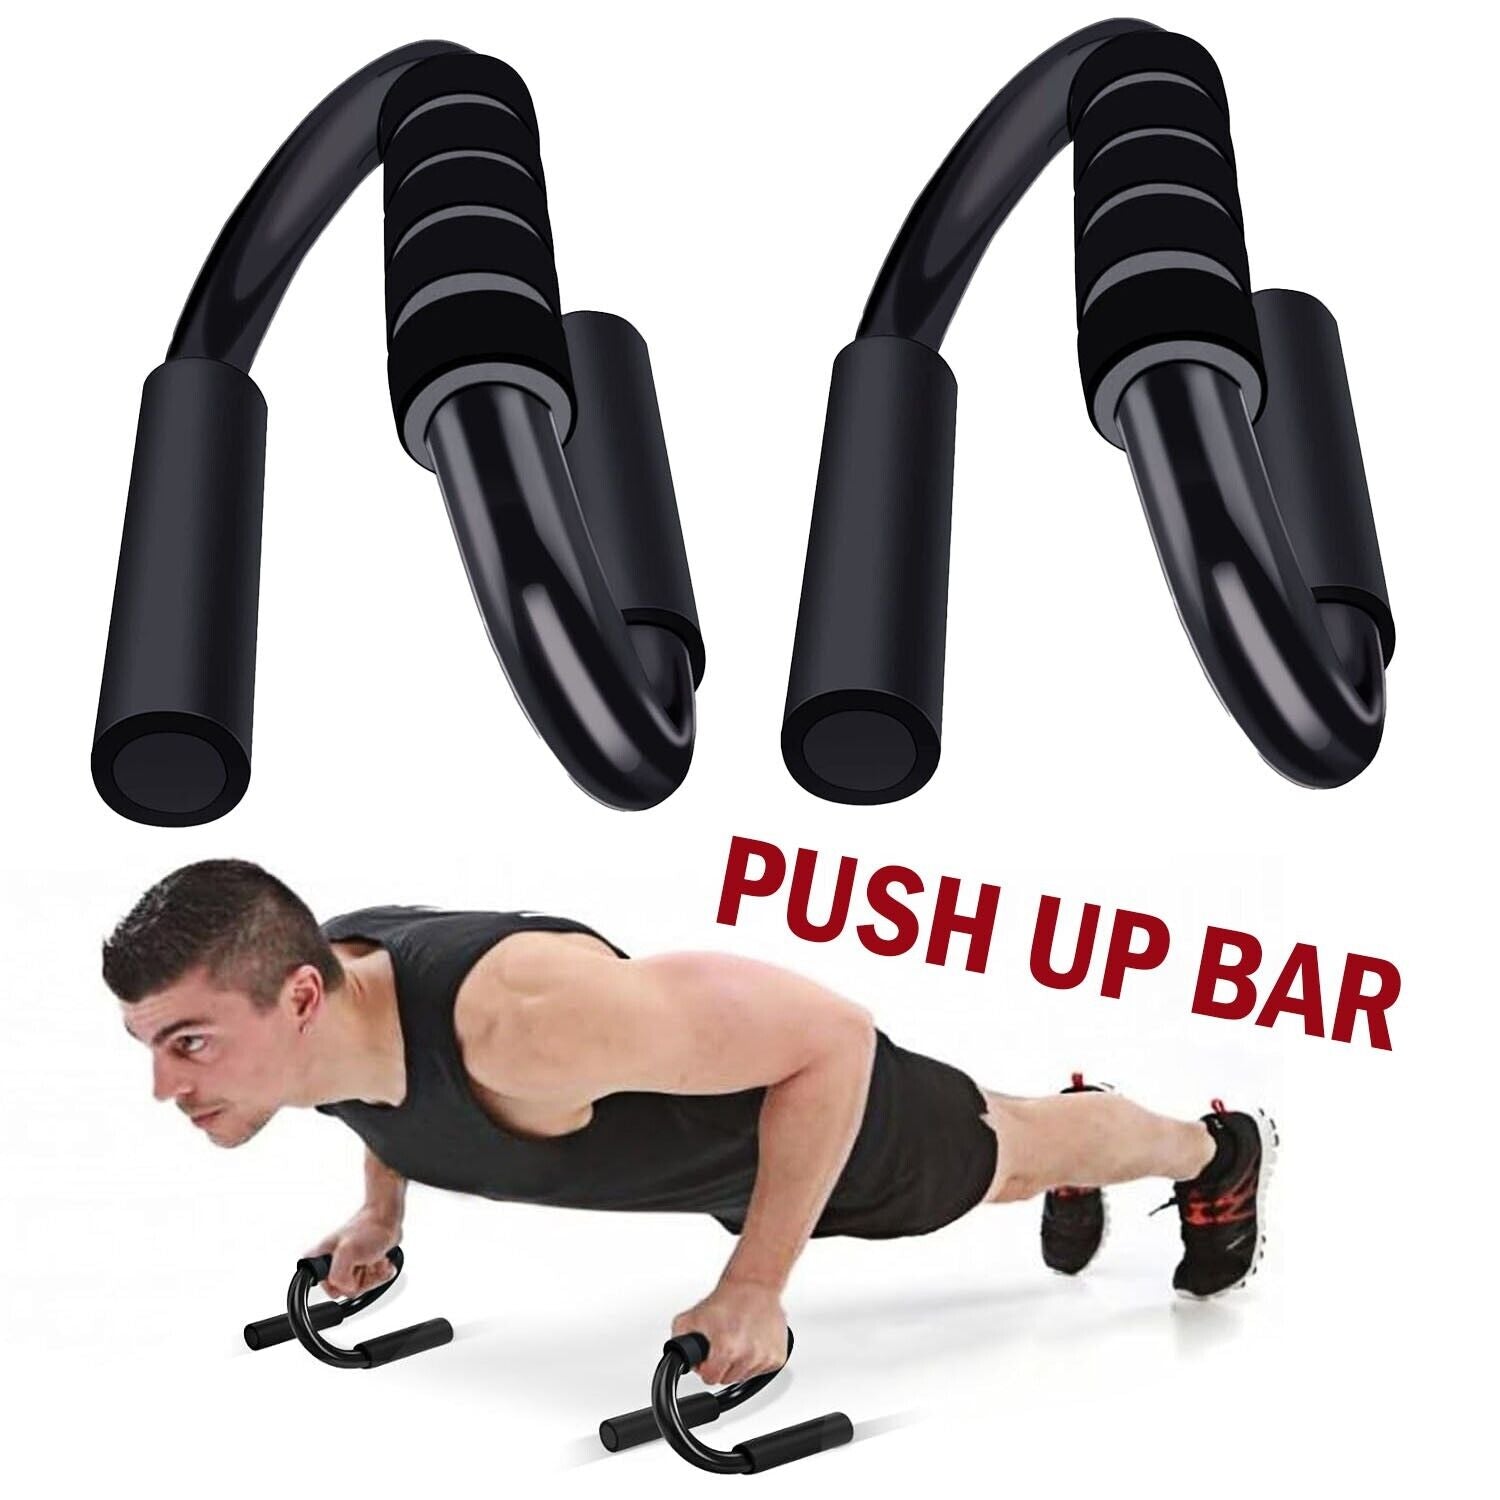 Push Up Bar S Shapes Non-slip Fitness Stand Exercise Grips Strength Workout Equipment Home Gym